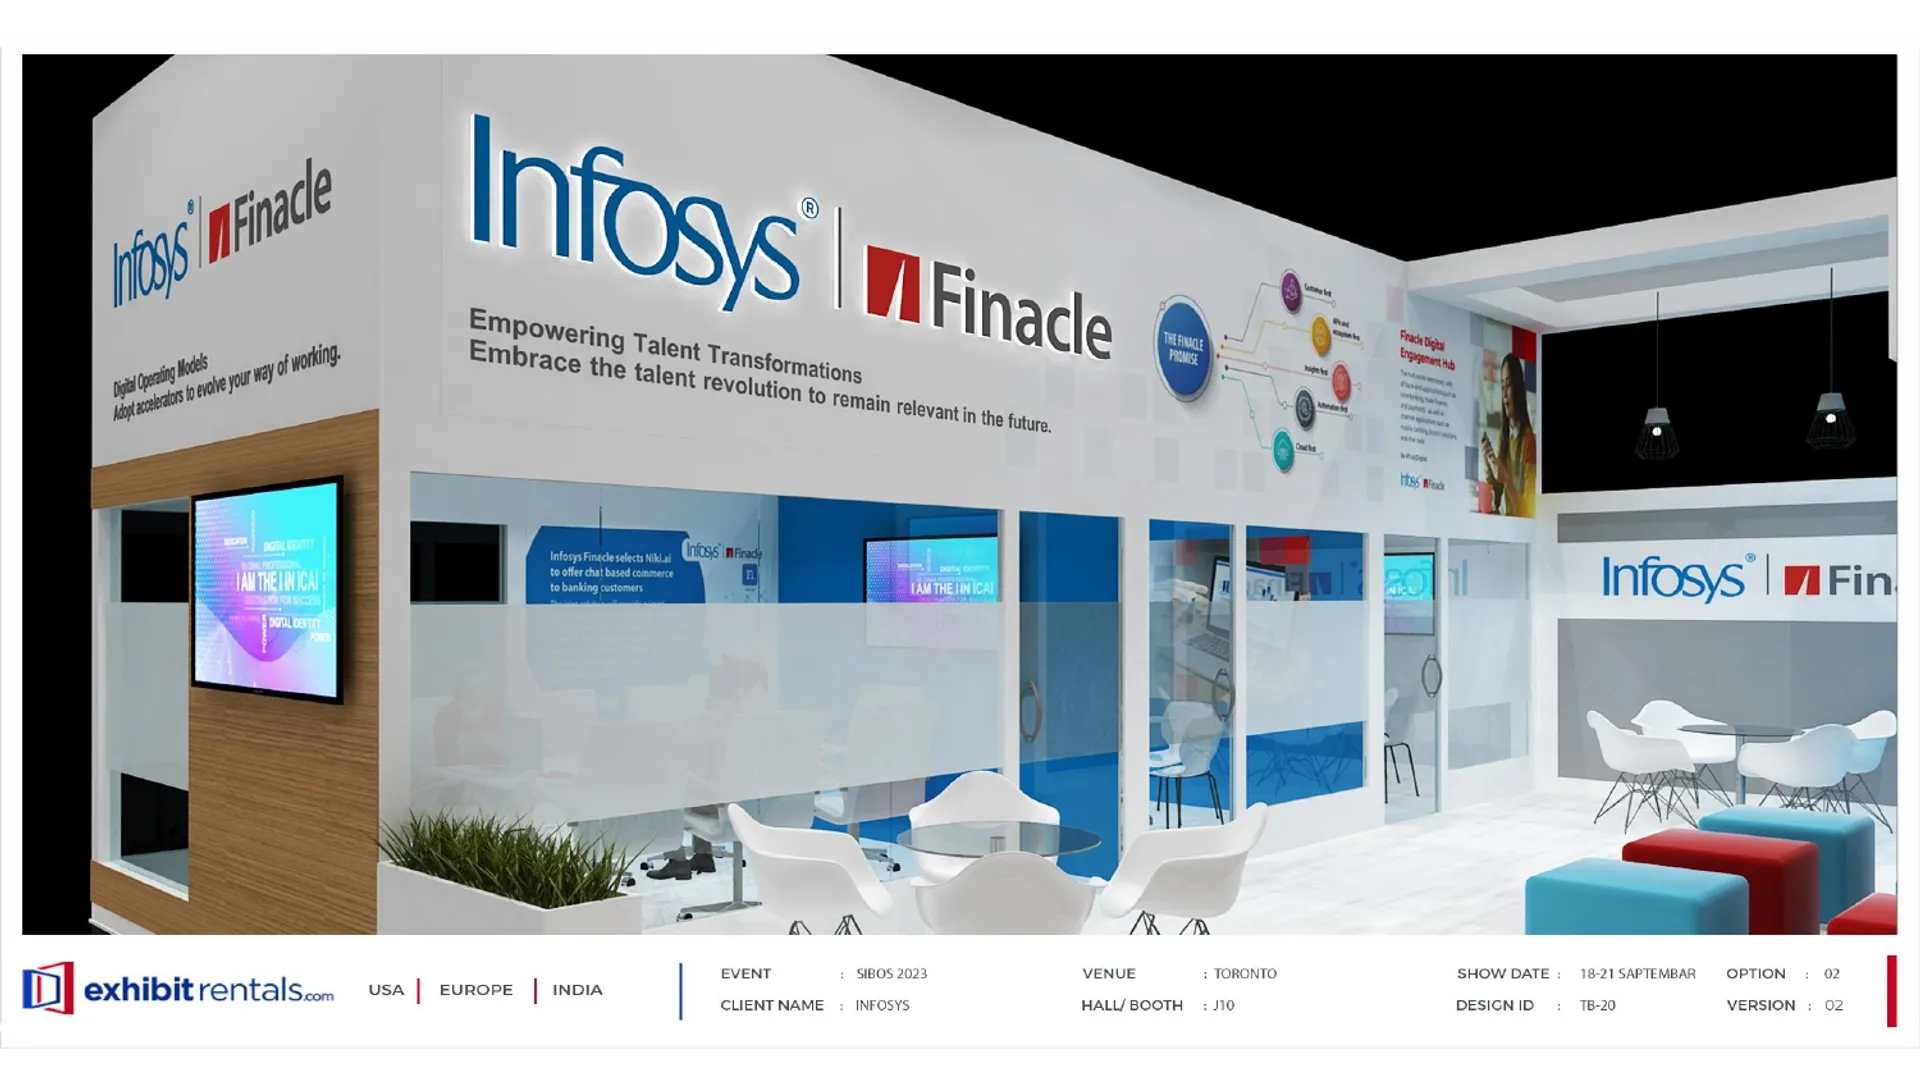 booth-design-projects/Exhibit-Rentals/2024-04-17-30x40-PENINSULA-Project-98/2.2 - Infosys - ER Design Presentation.pptx-22_page-0001-7pwm12.jpg